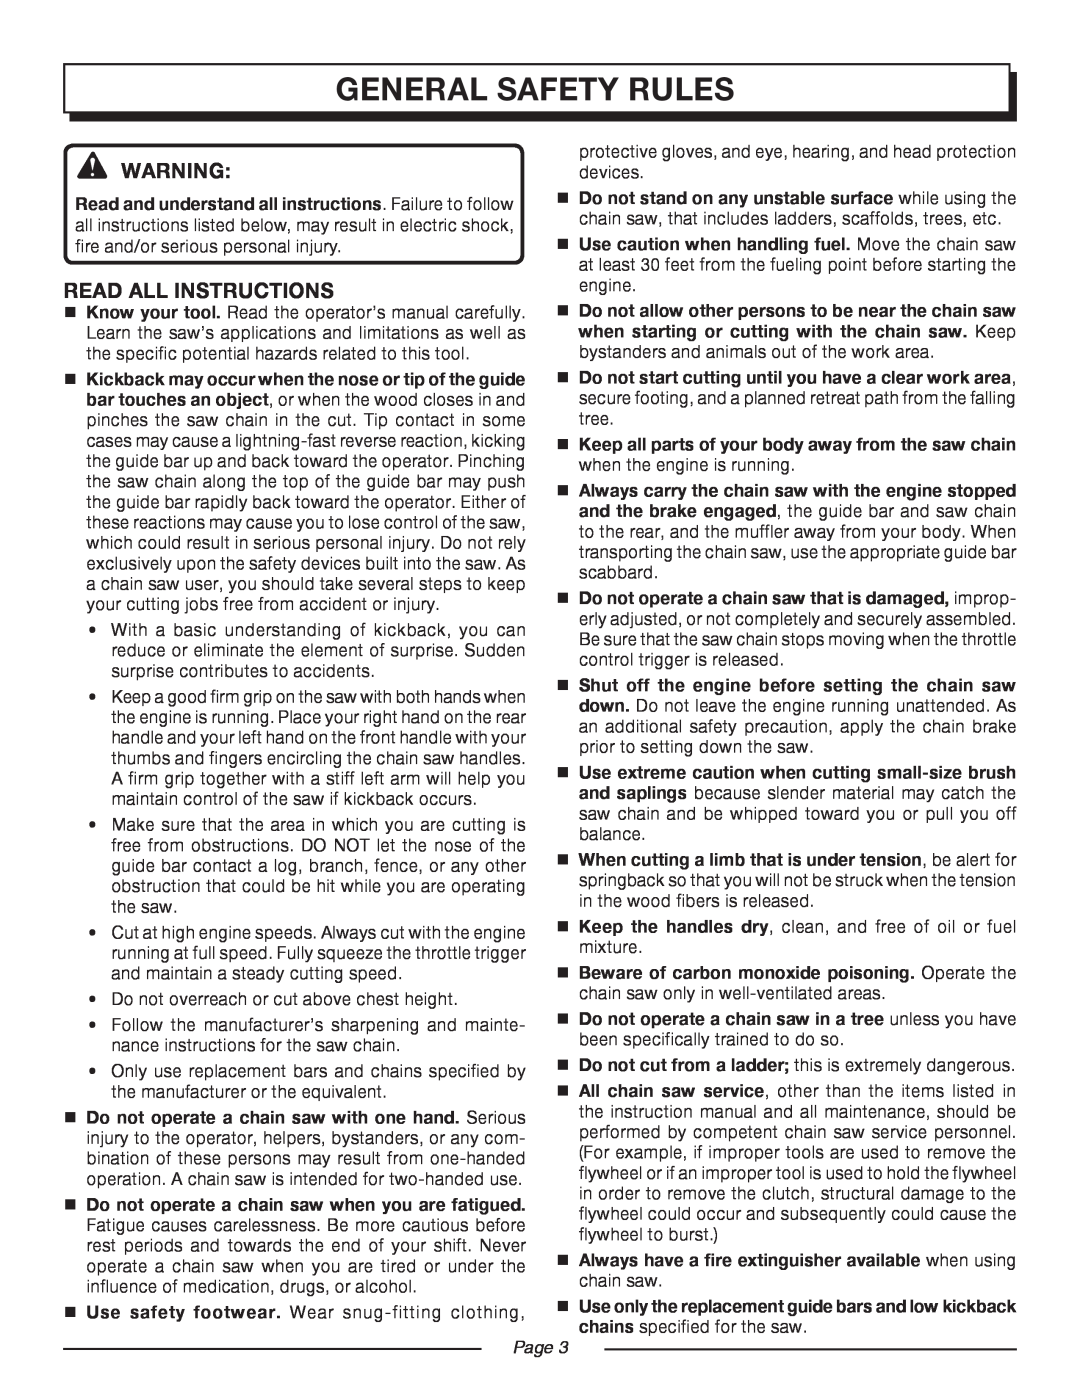 Homelite UT10552 manual general safety rules, Read All Instructions, Page  